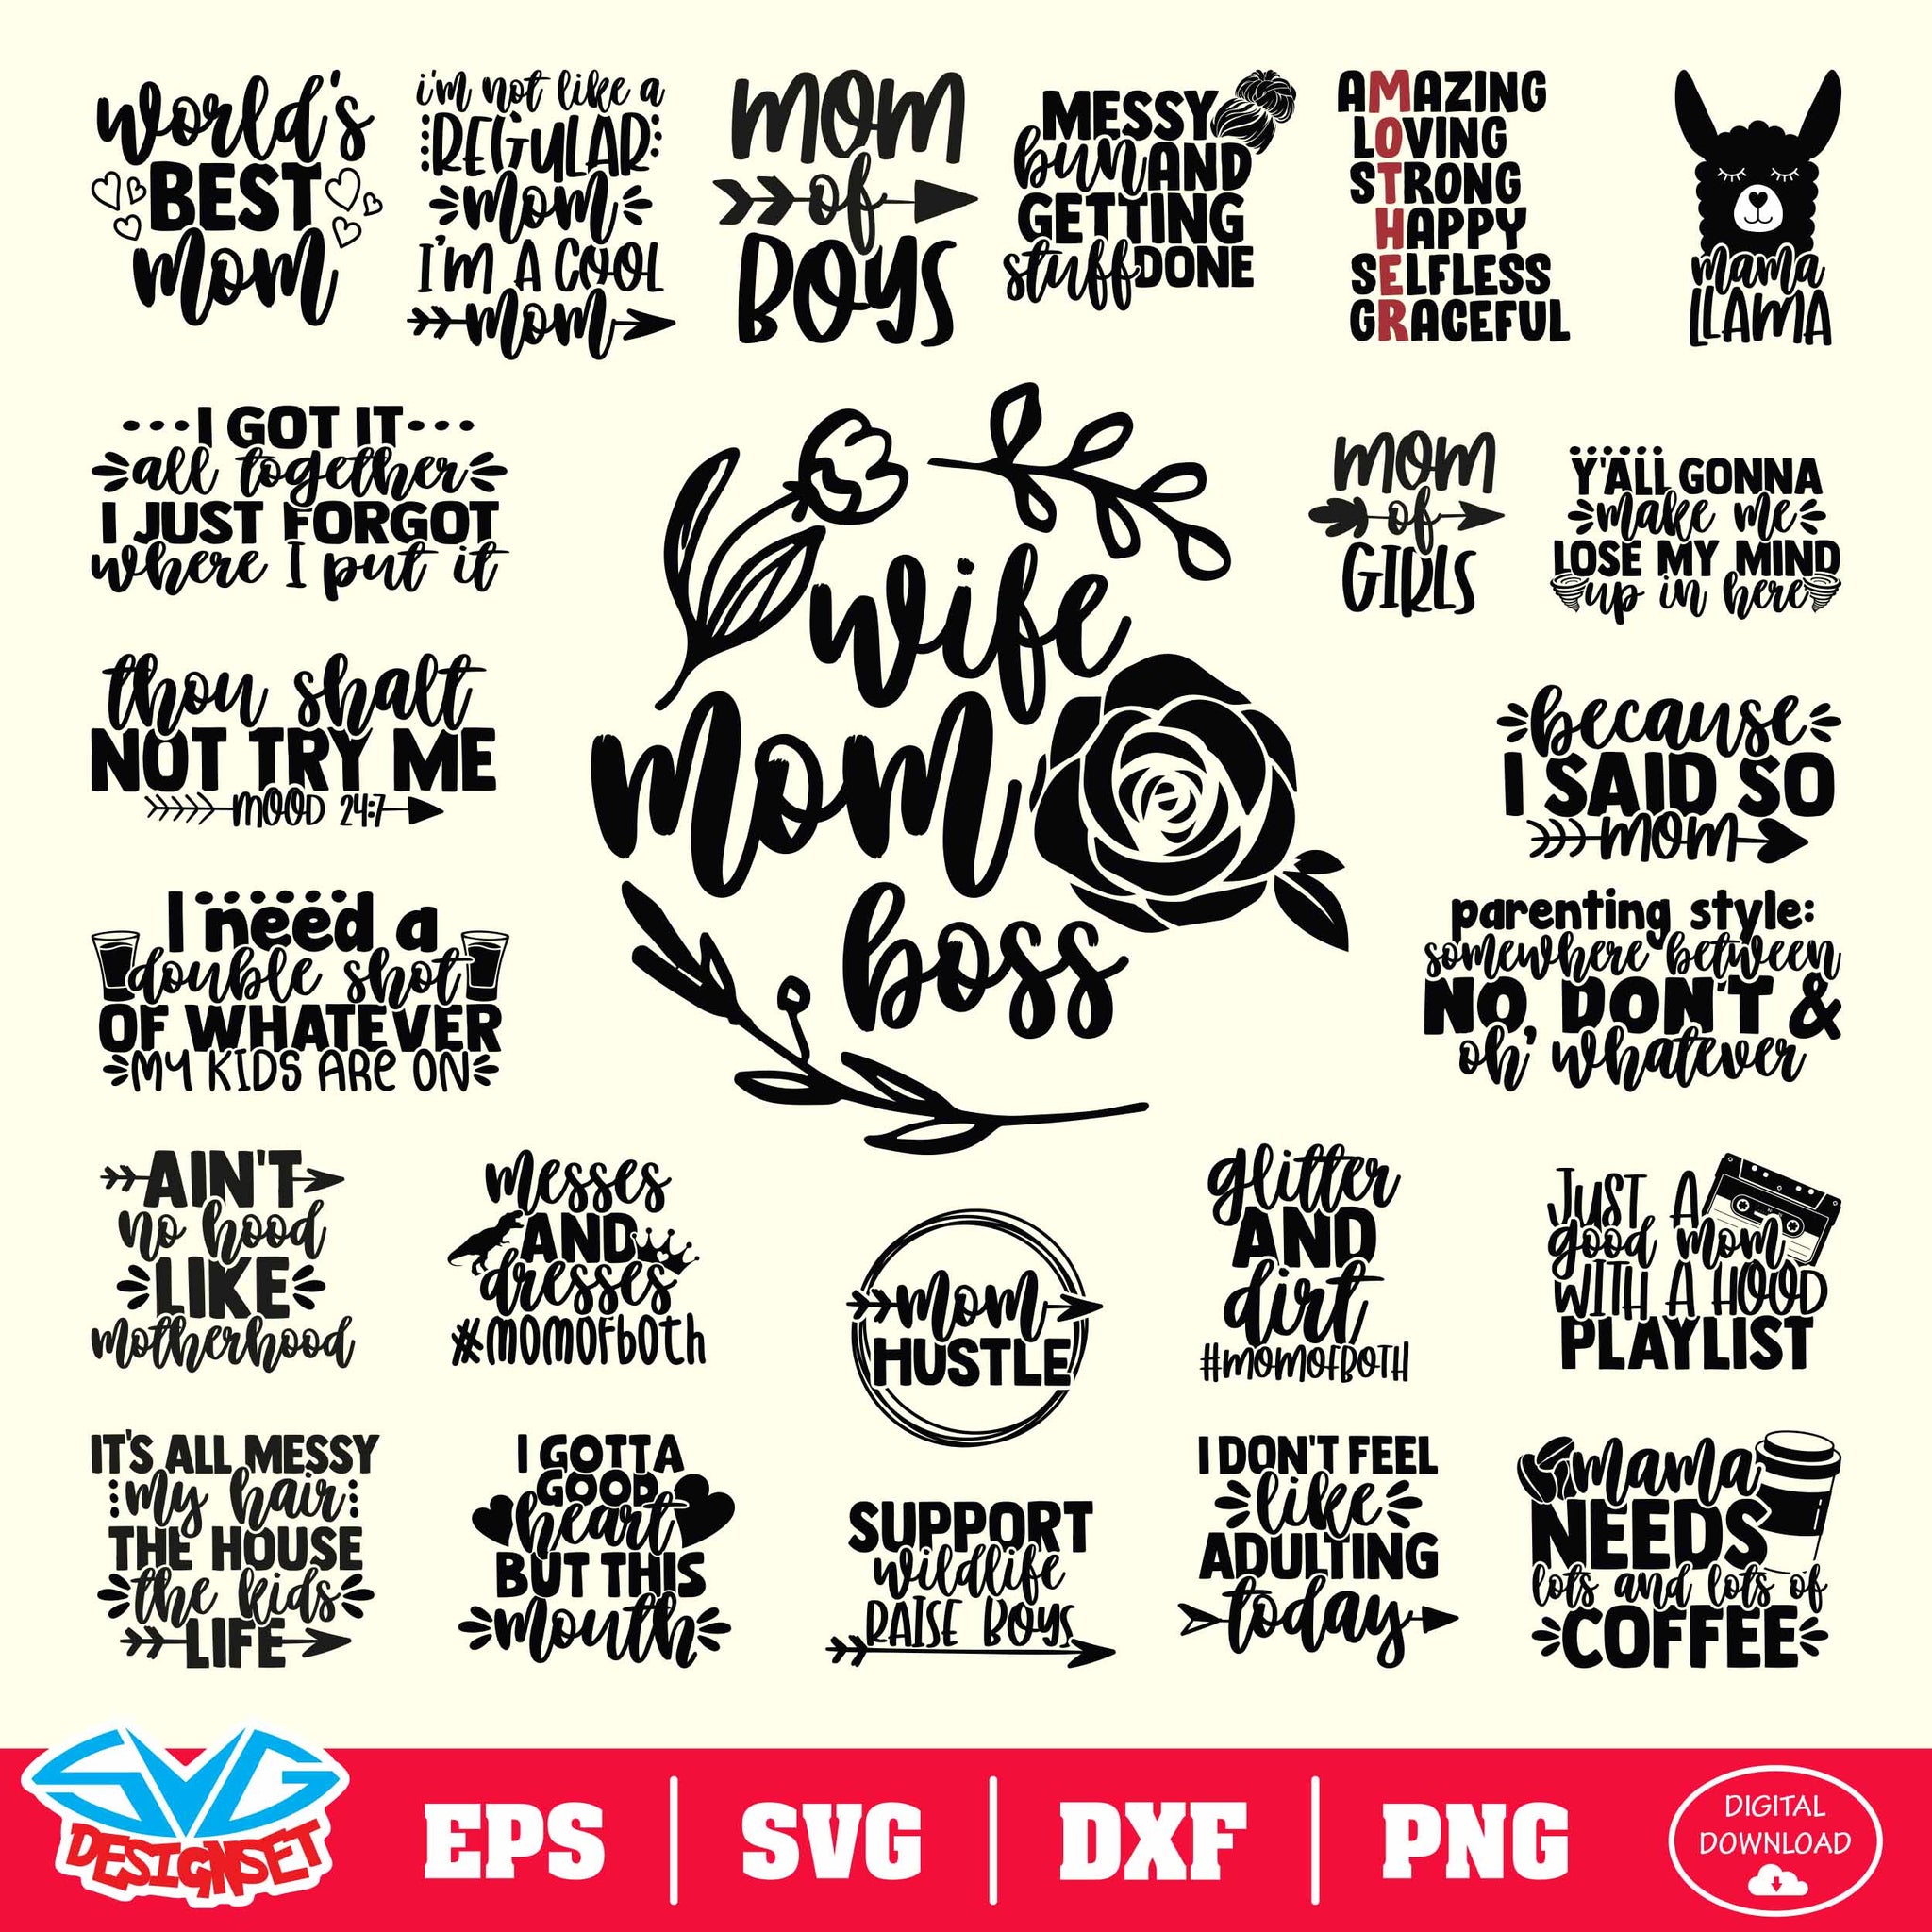 Happy Mother's Day Bundle Svg, Dxf, Eps, Png, Clipart, Silhouette and Cutfiles #8 - SVGDesignSets